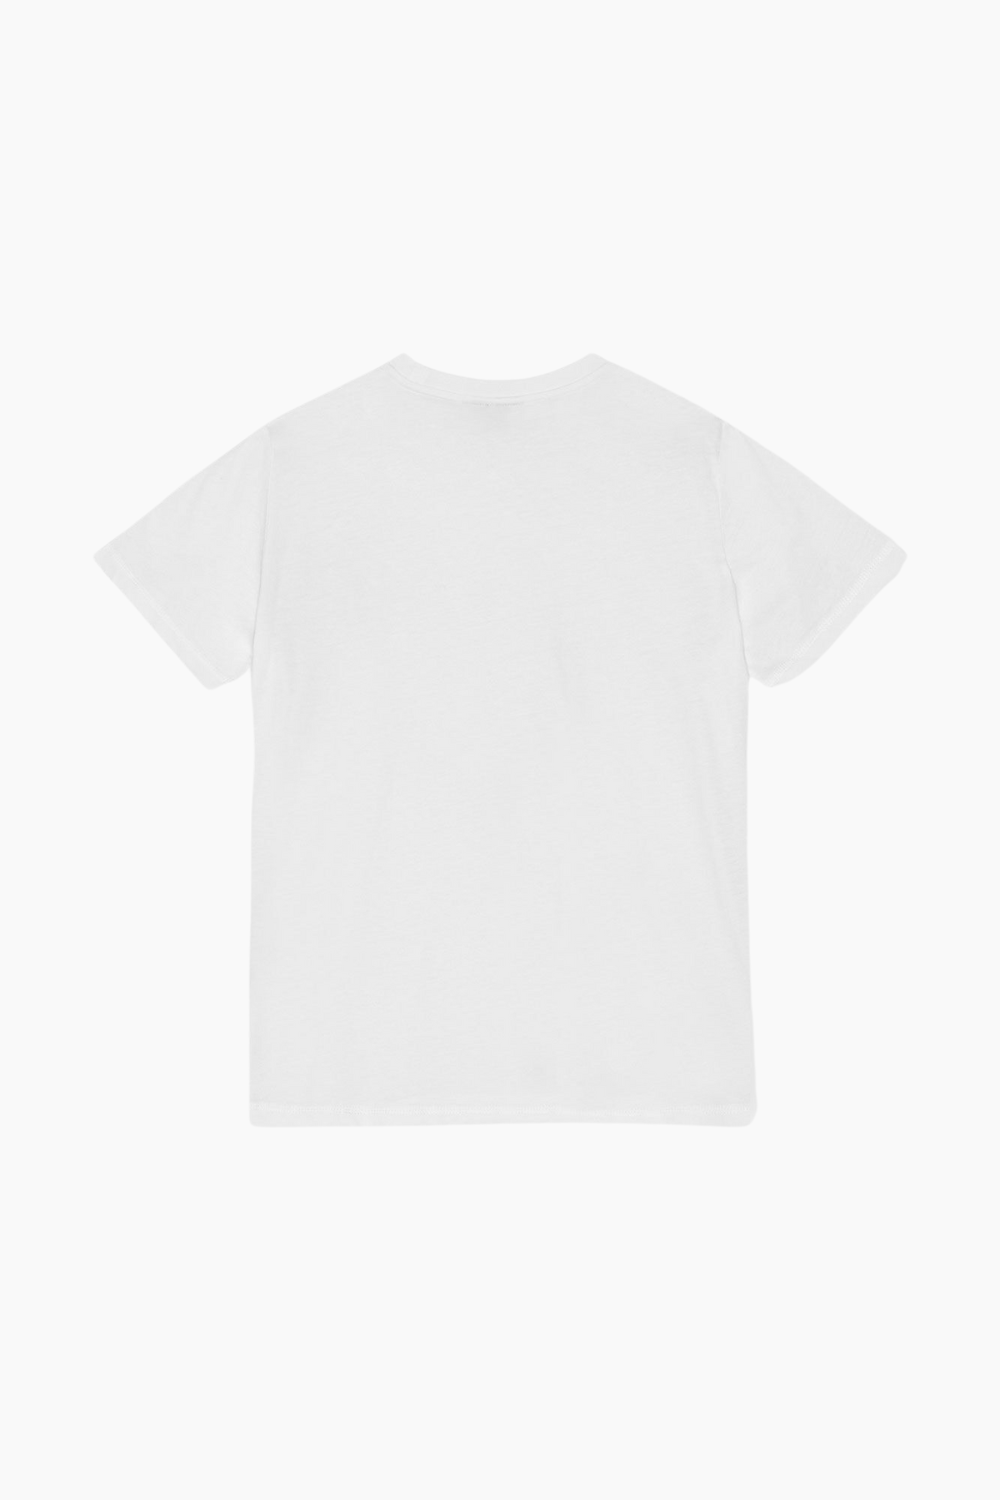 Thin Jersey GoGo Relaxed T-Shirt T3925 - Bright White - GANNI